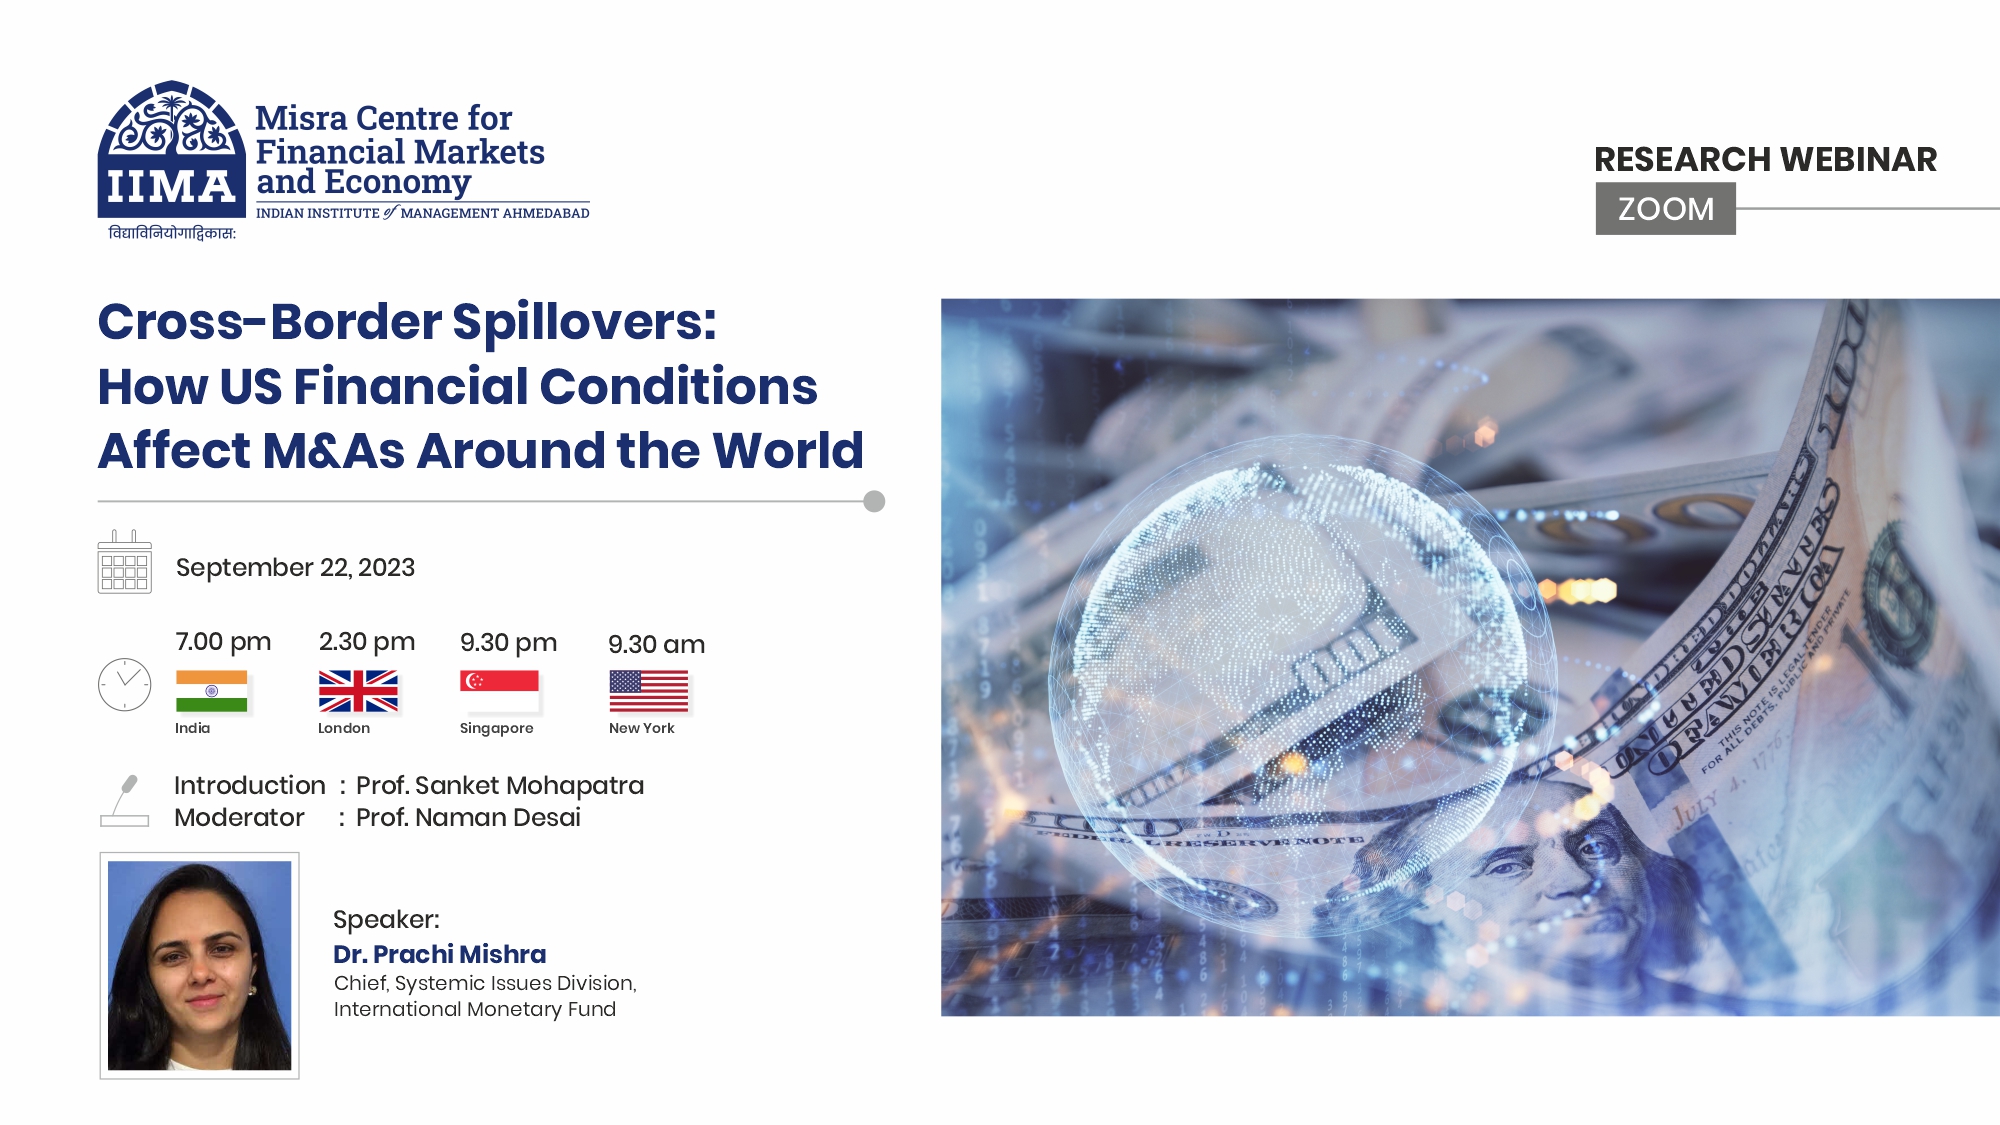 How US Financial Conditions Affect M&As Around the World Social Media